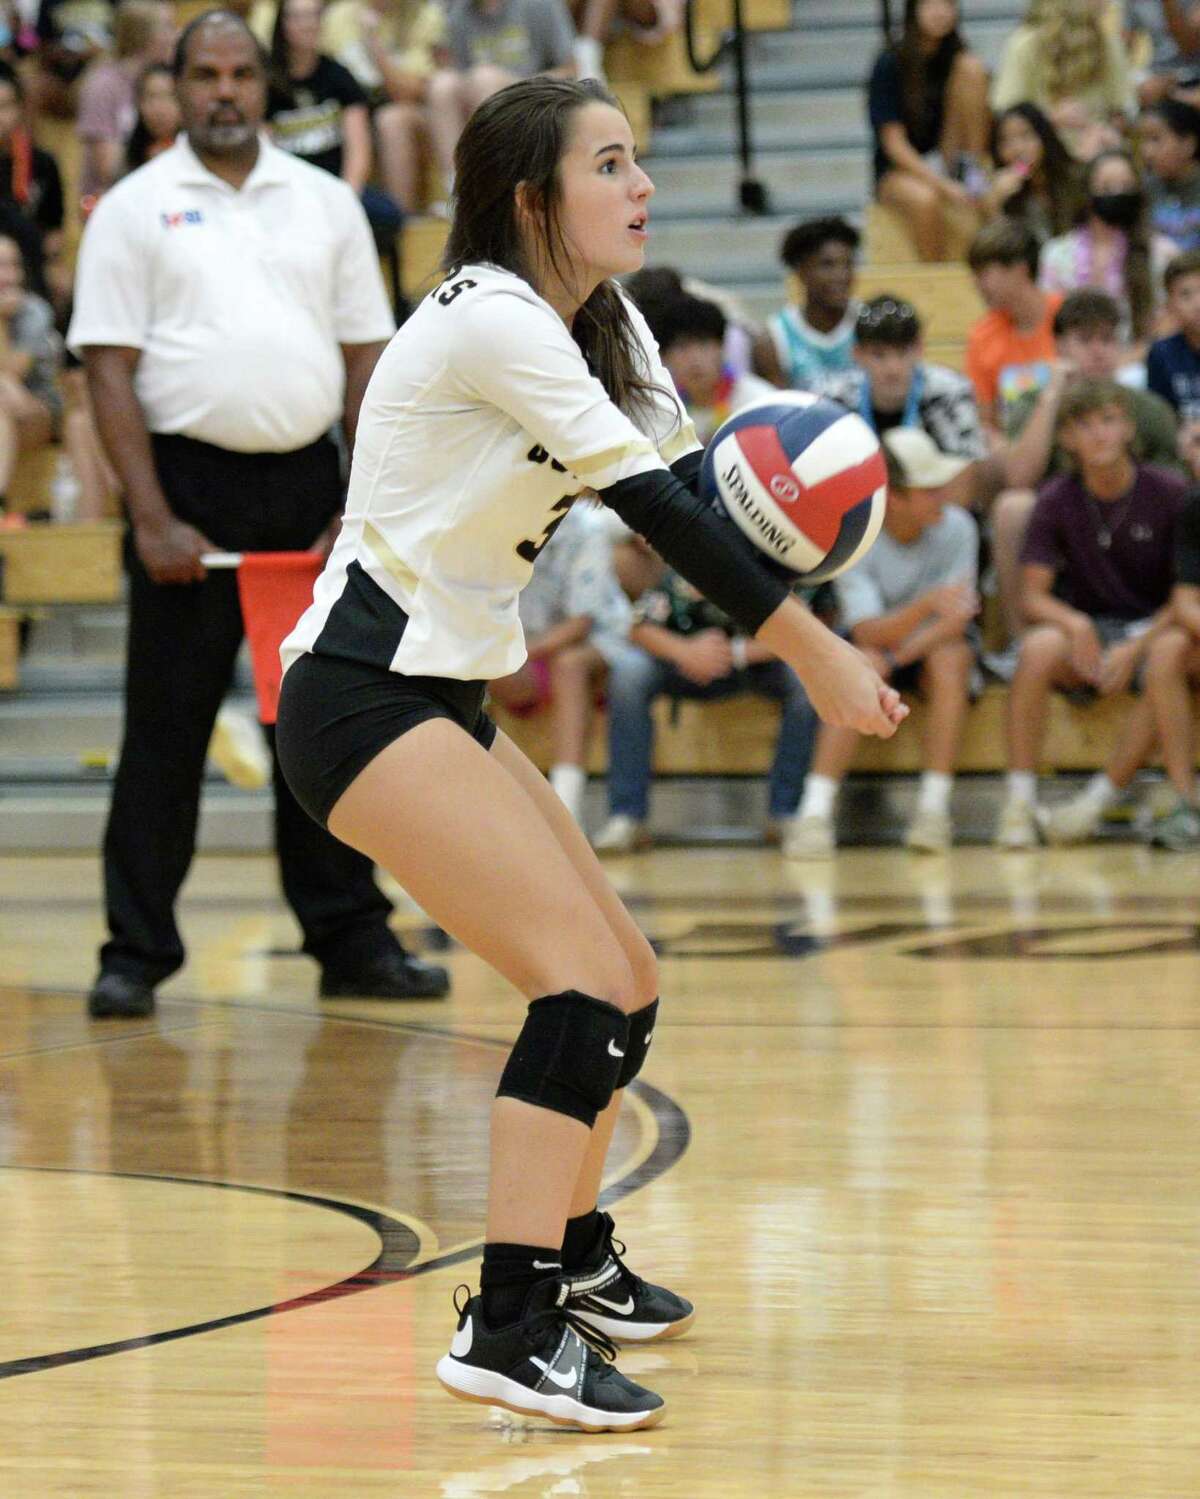 Isabella Provada (3) of Jordan digs for a ball during the second set of a 5A-III District 19 game between the Paetow Panthers and the Jordan Warriors on Tuesday, August 31, 2021 at Jordan High School, Fulshear, TX.